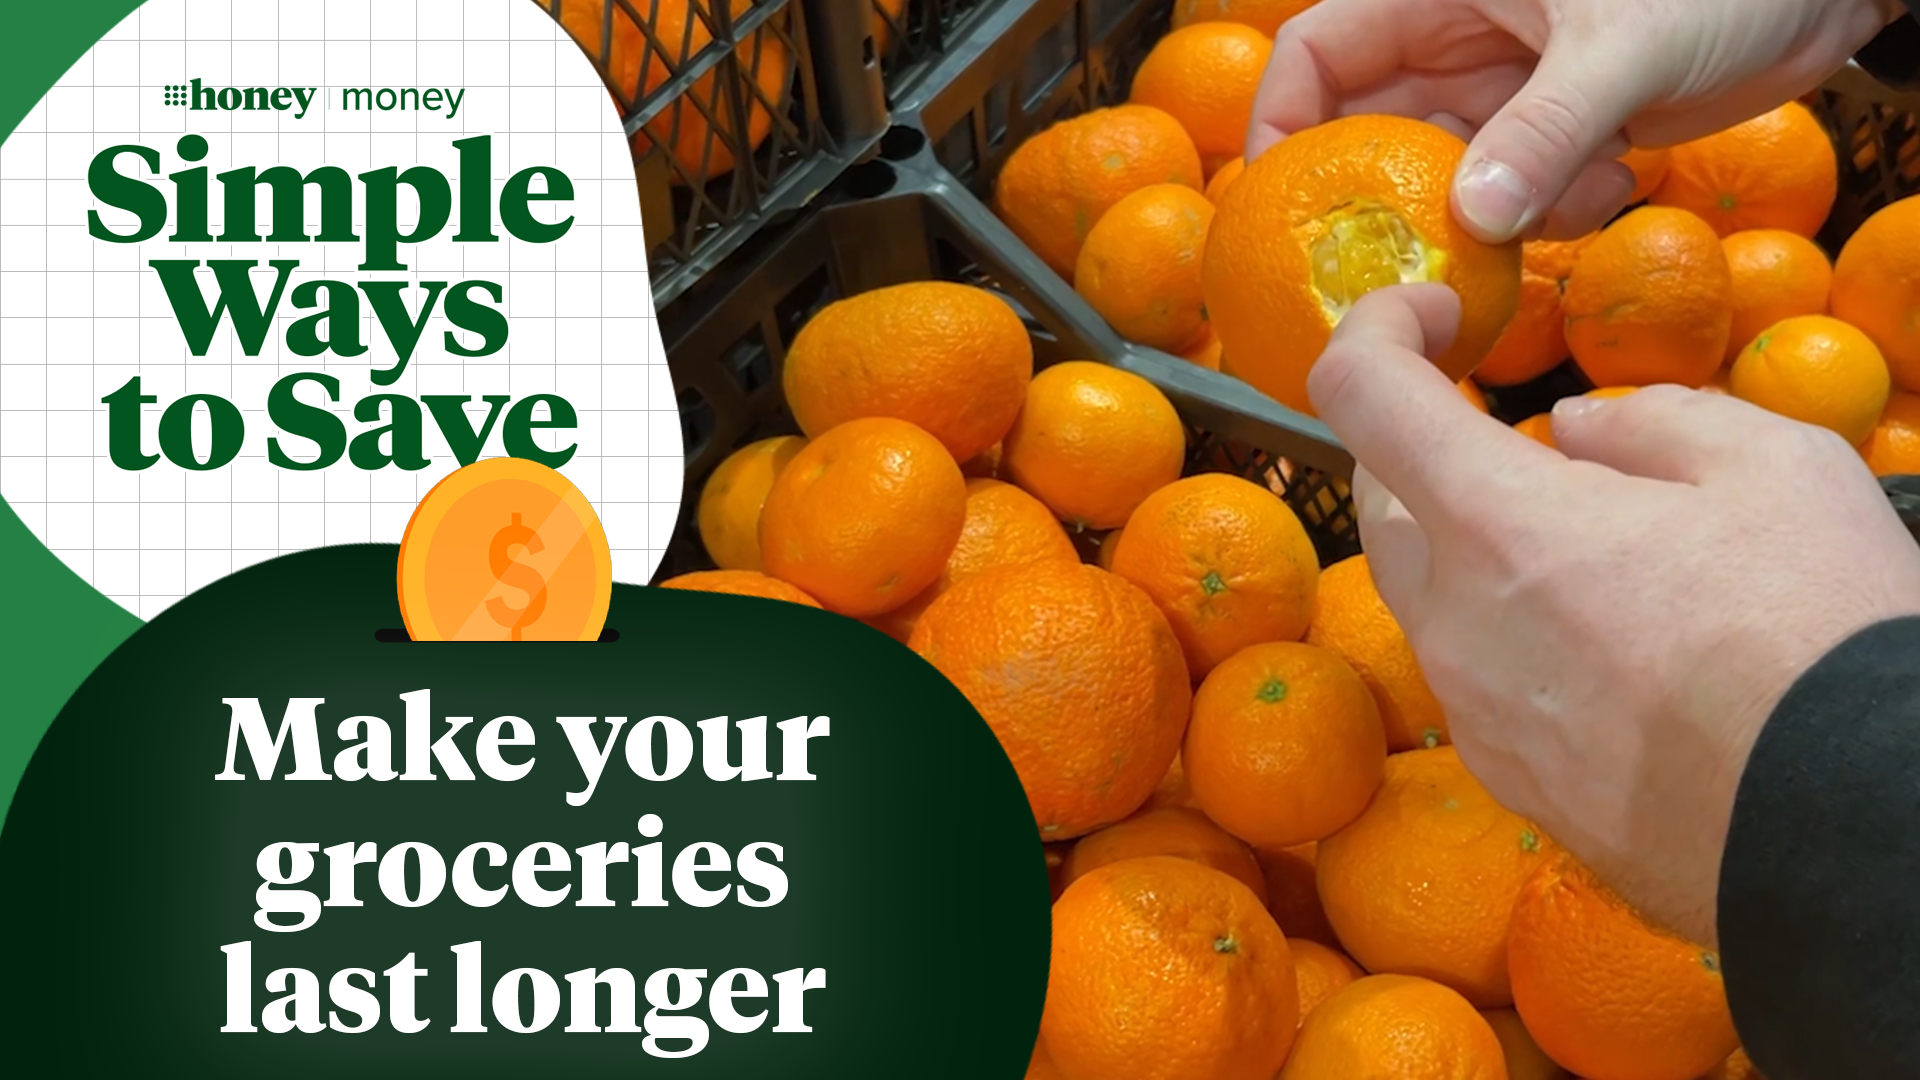 Simple Ways to Save: How to make your groceries last even longer